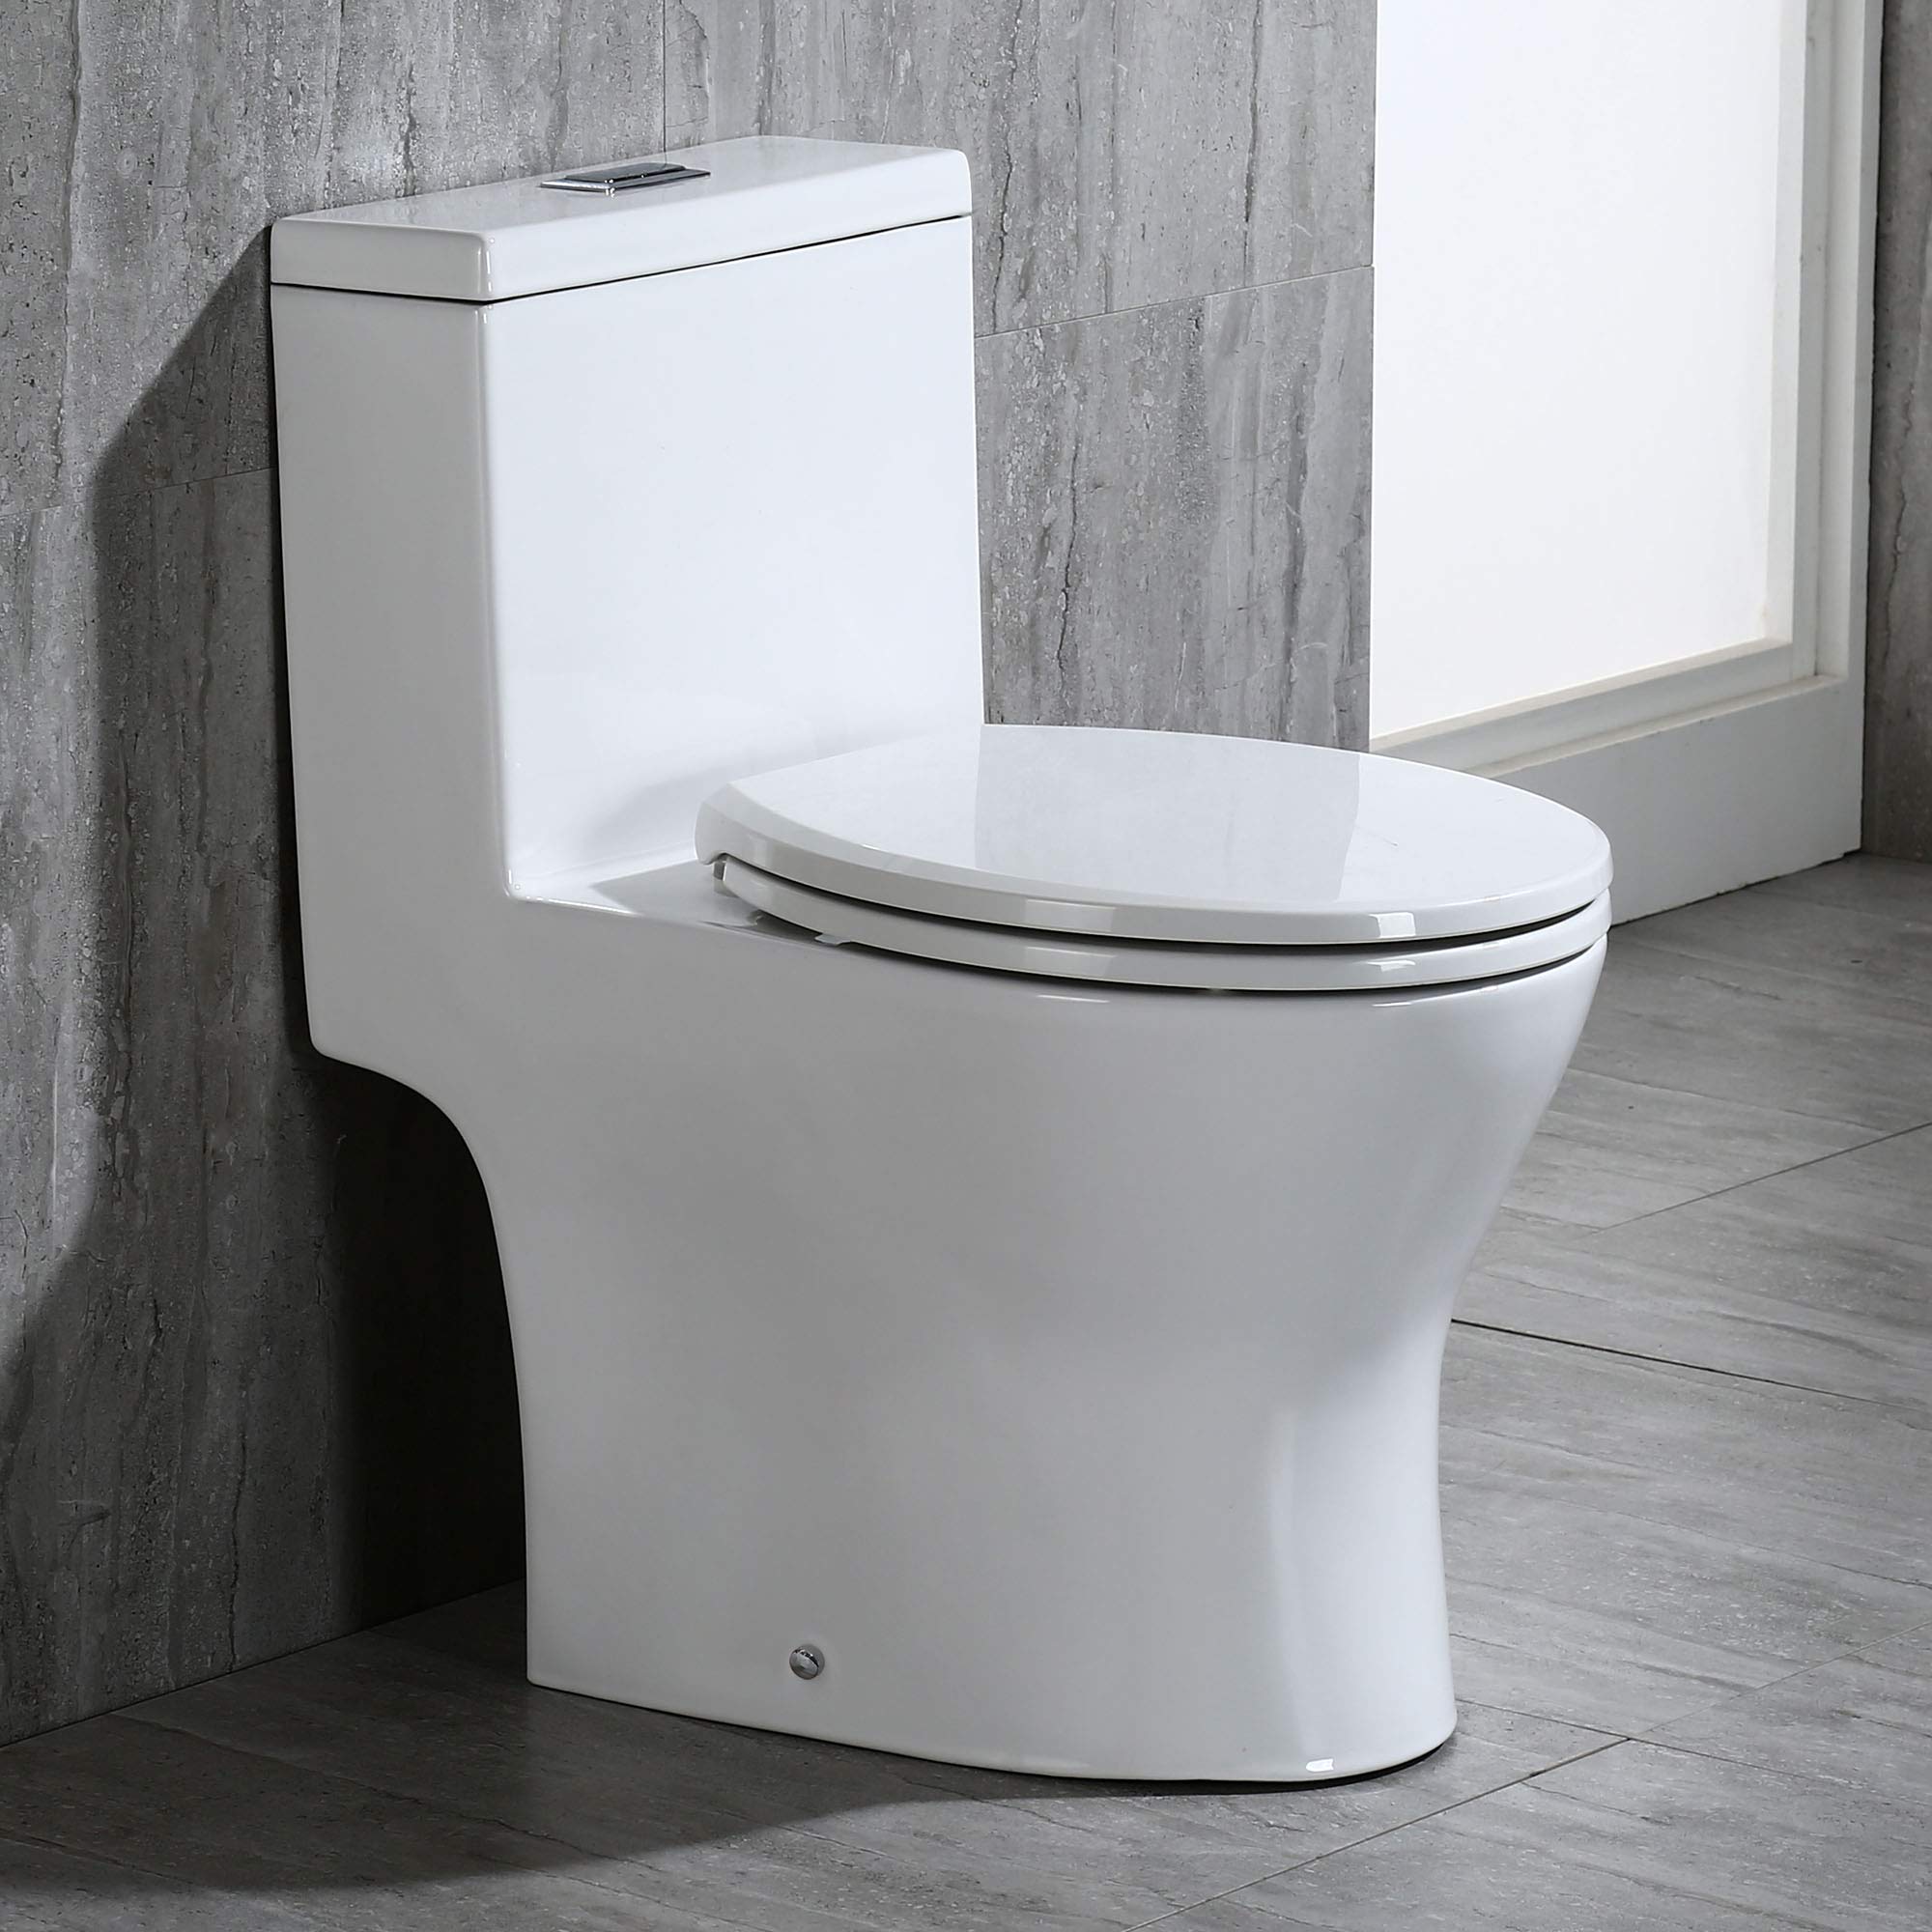 WOODBRIDGE T-0031 Short Compact Tiny Dual Flush 1.28 GP One Piece Toilet with Soft Closing Seat,1000 Gram MaP Flushing Score Small Toilet,White